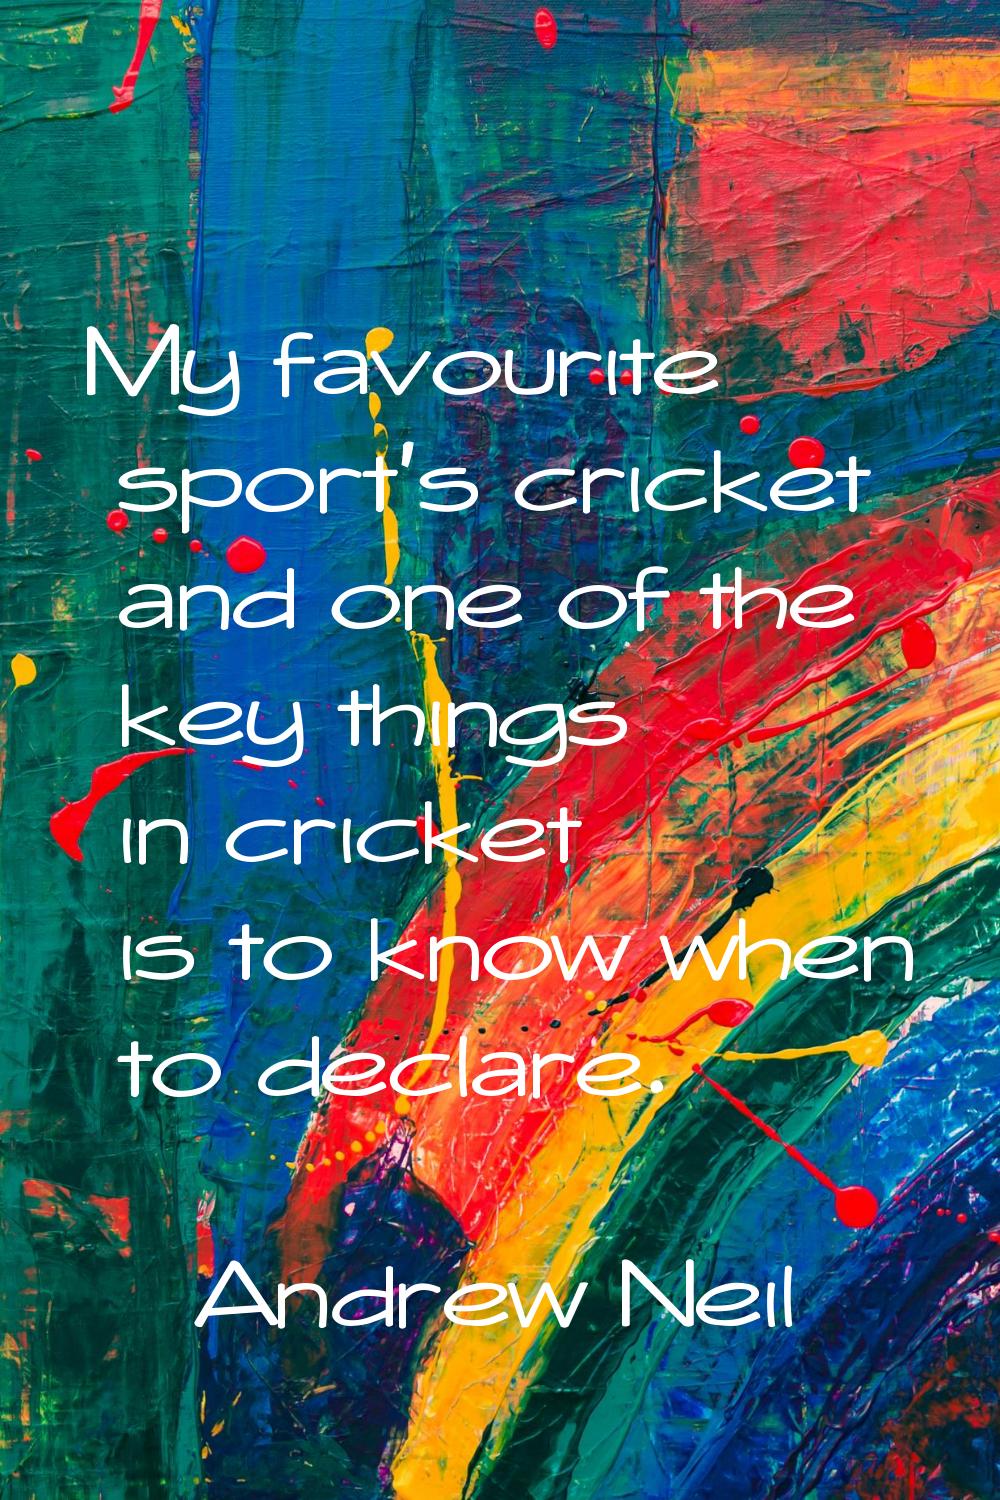 My favourite sport's cricket and one of the key things in cricket is to know when to declare.